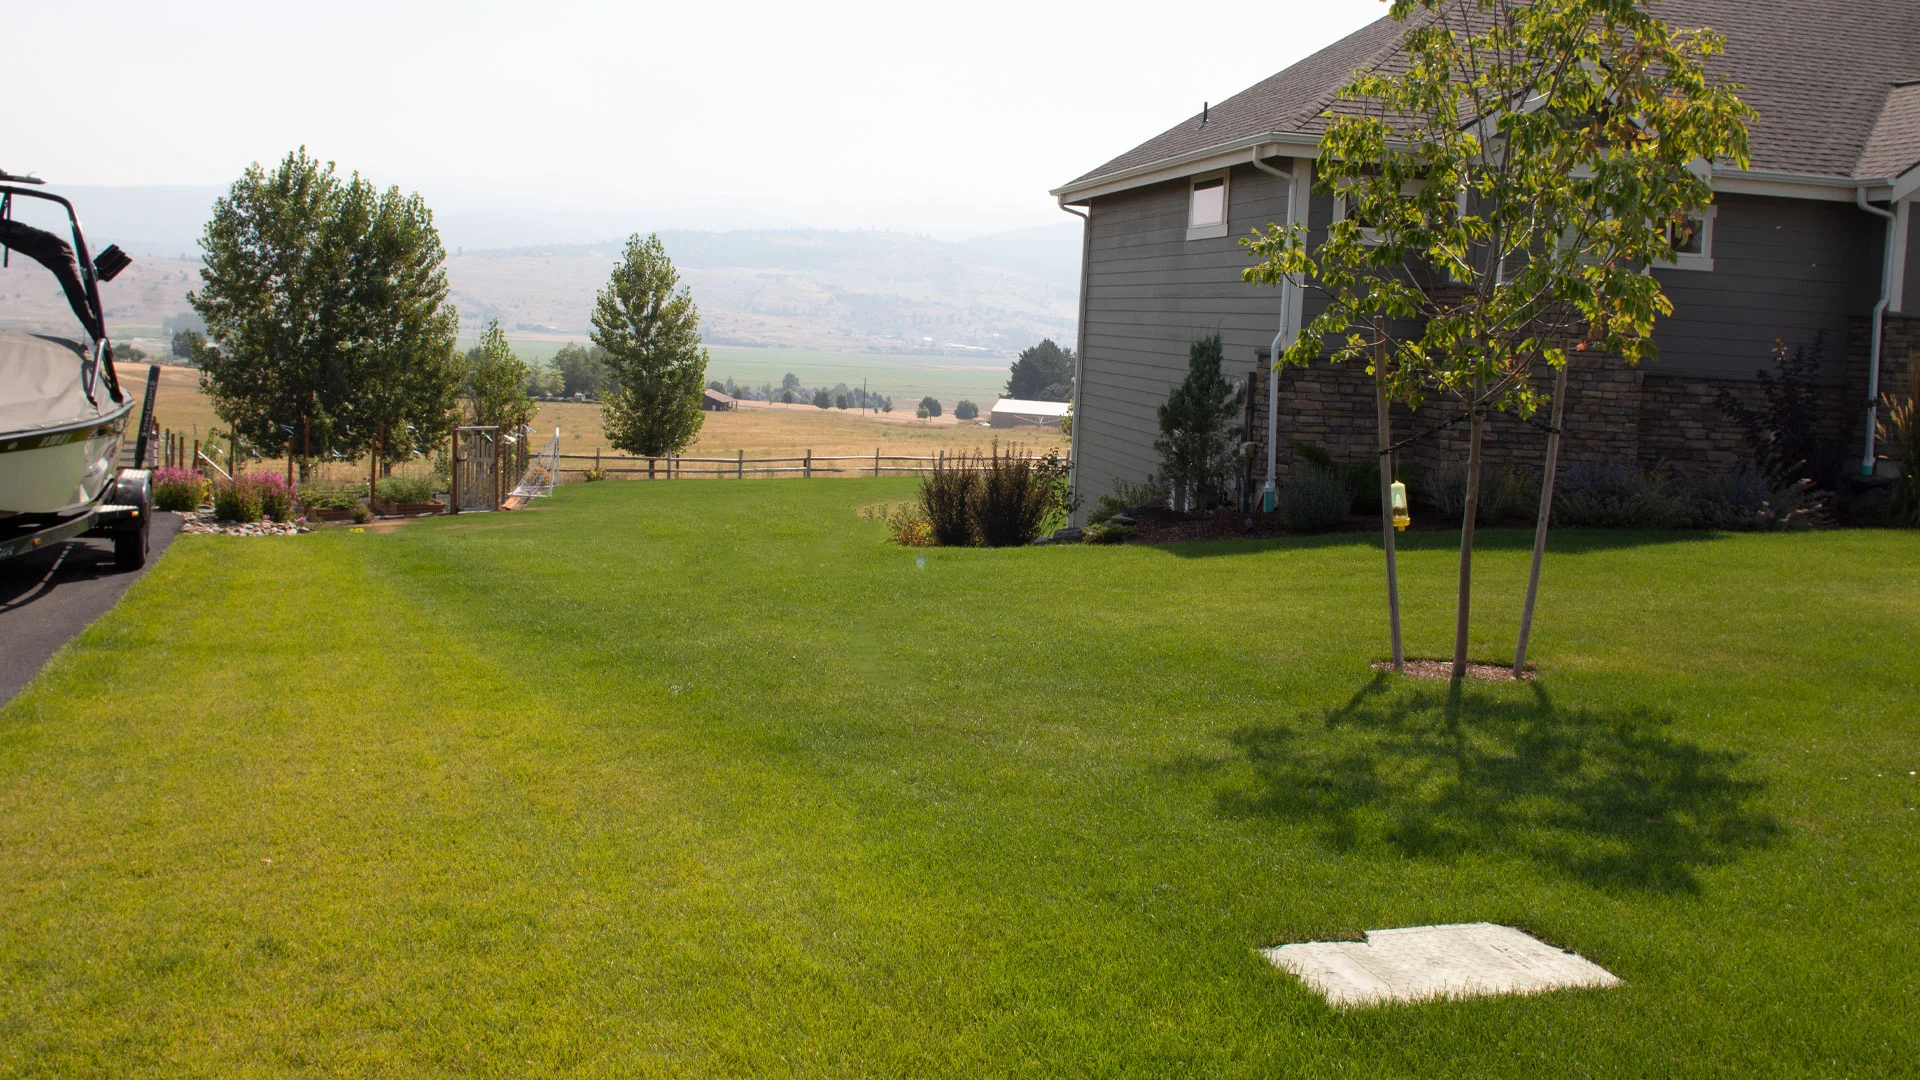 A Sure Green Lawn & Tree Service clients lawn after regular lawn treatments.